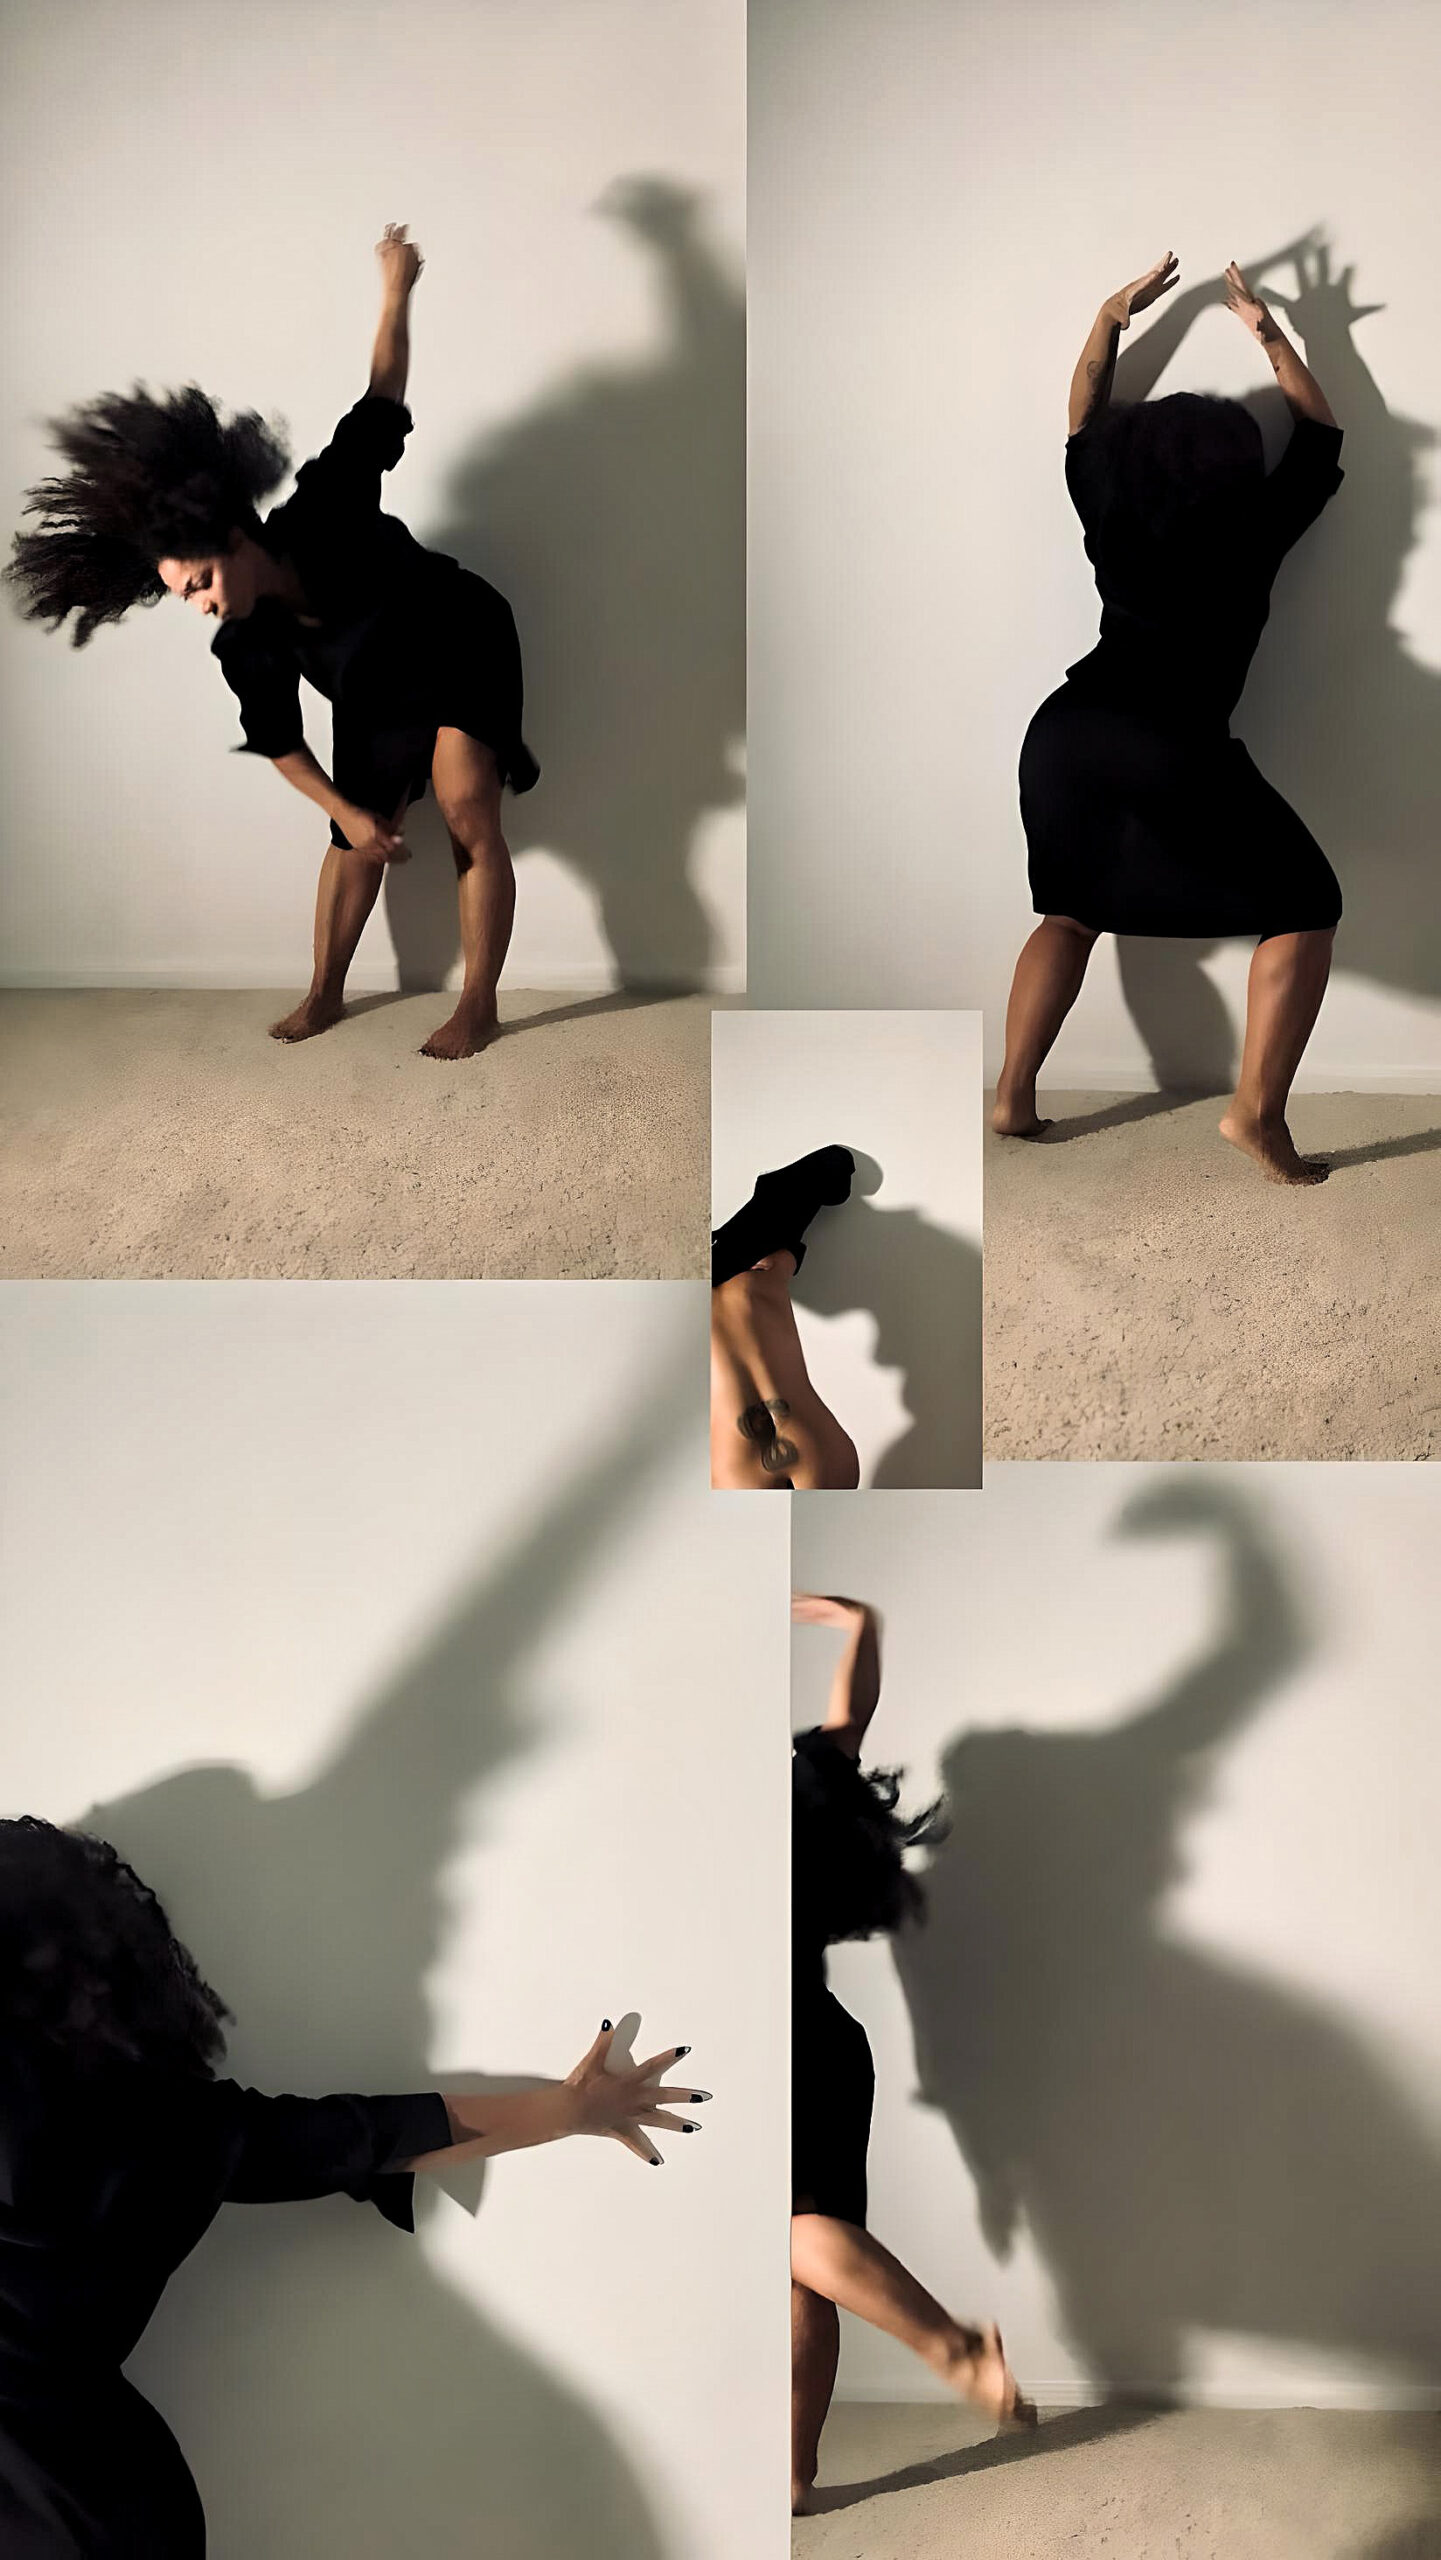 Different pictures capture a lady dancing in her room from various angles.